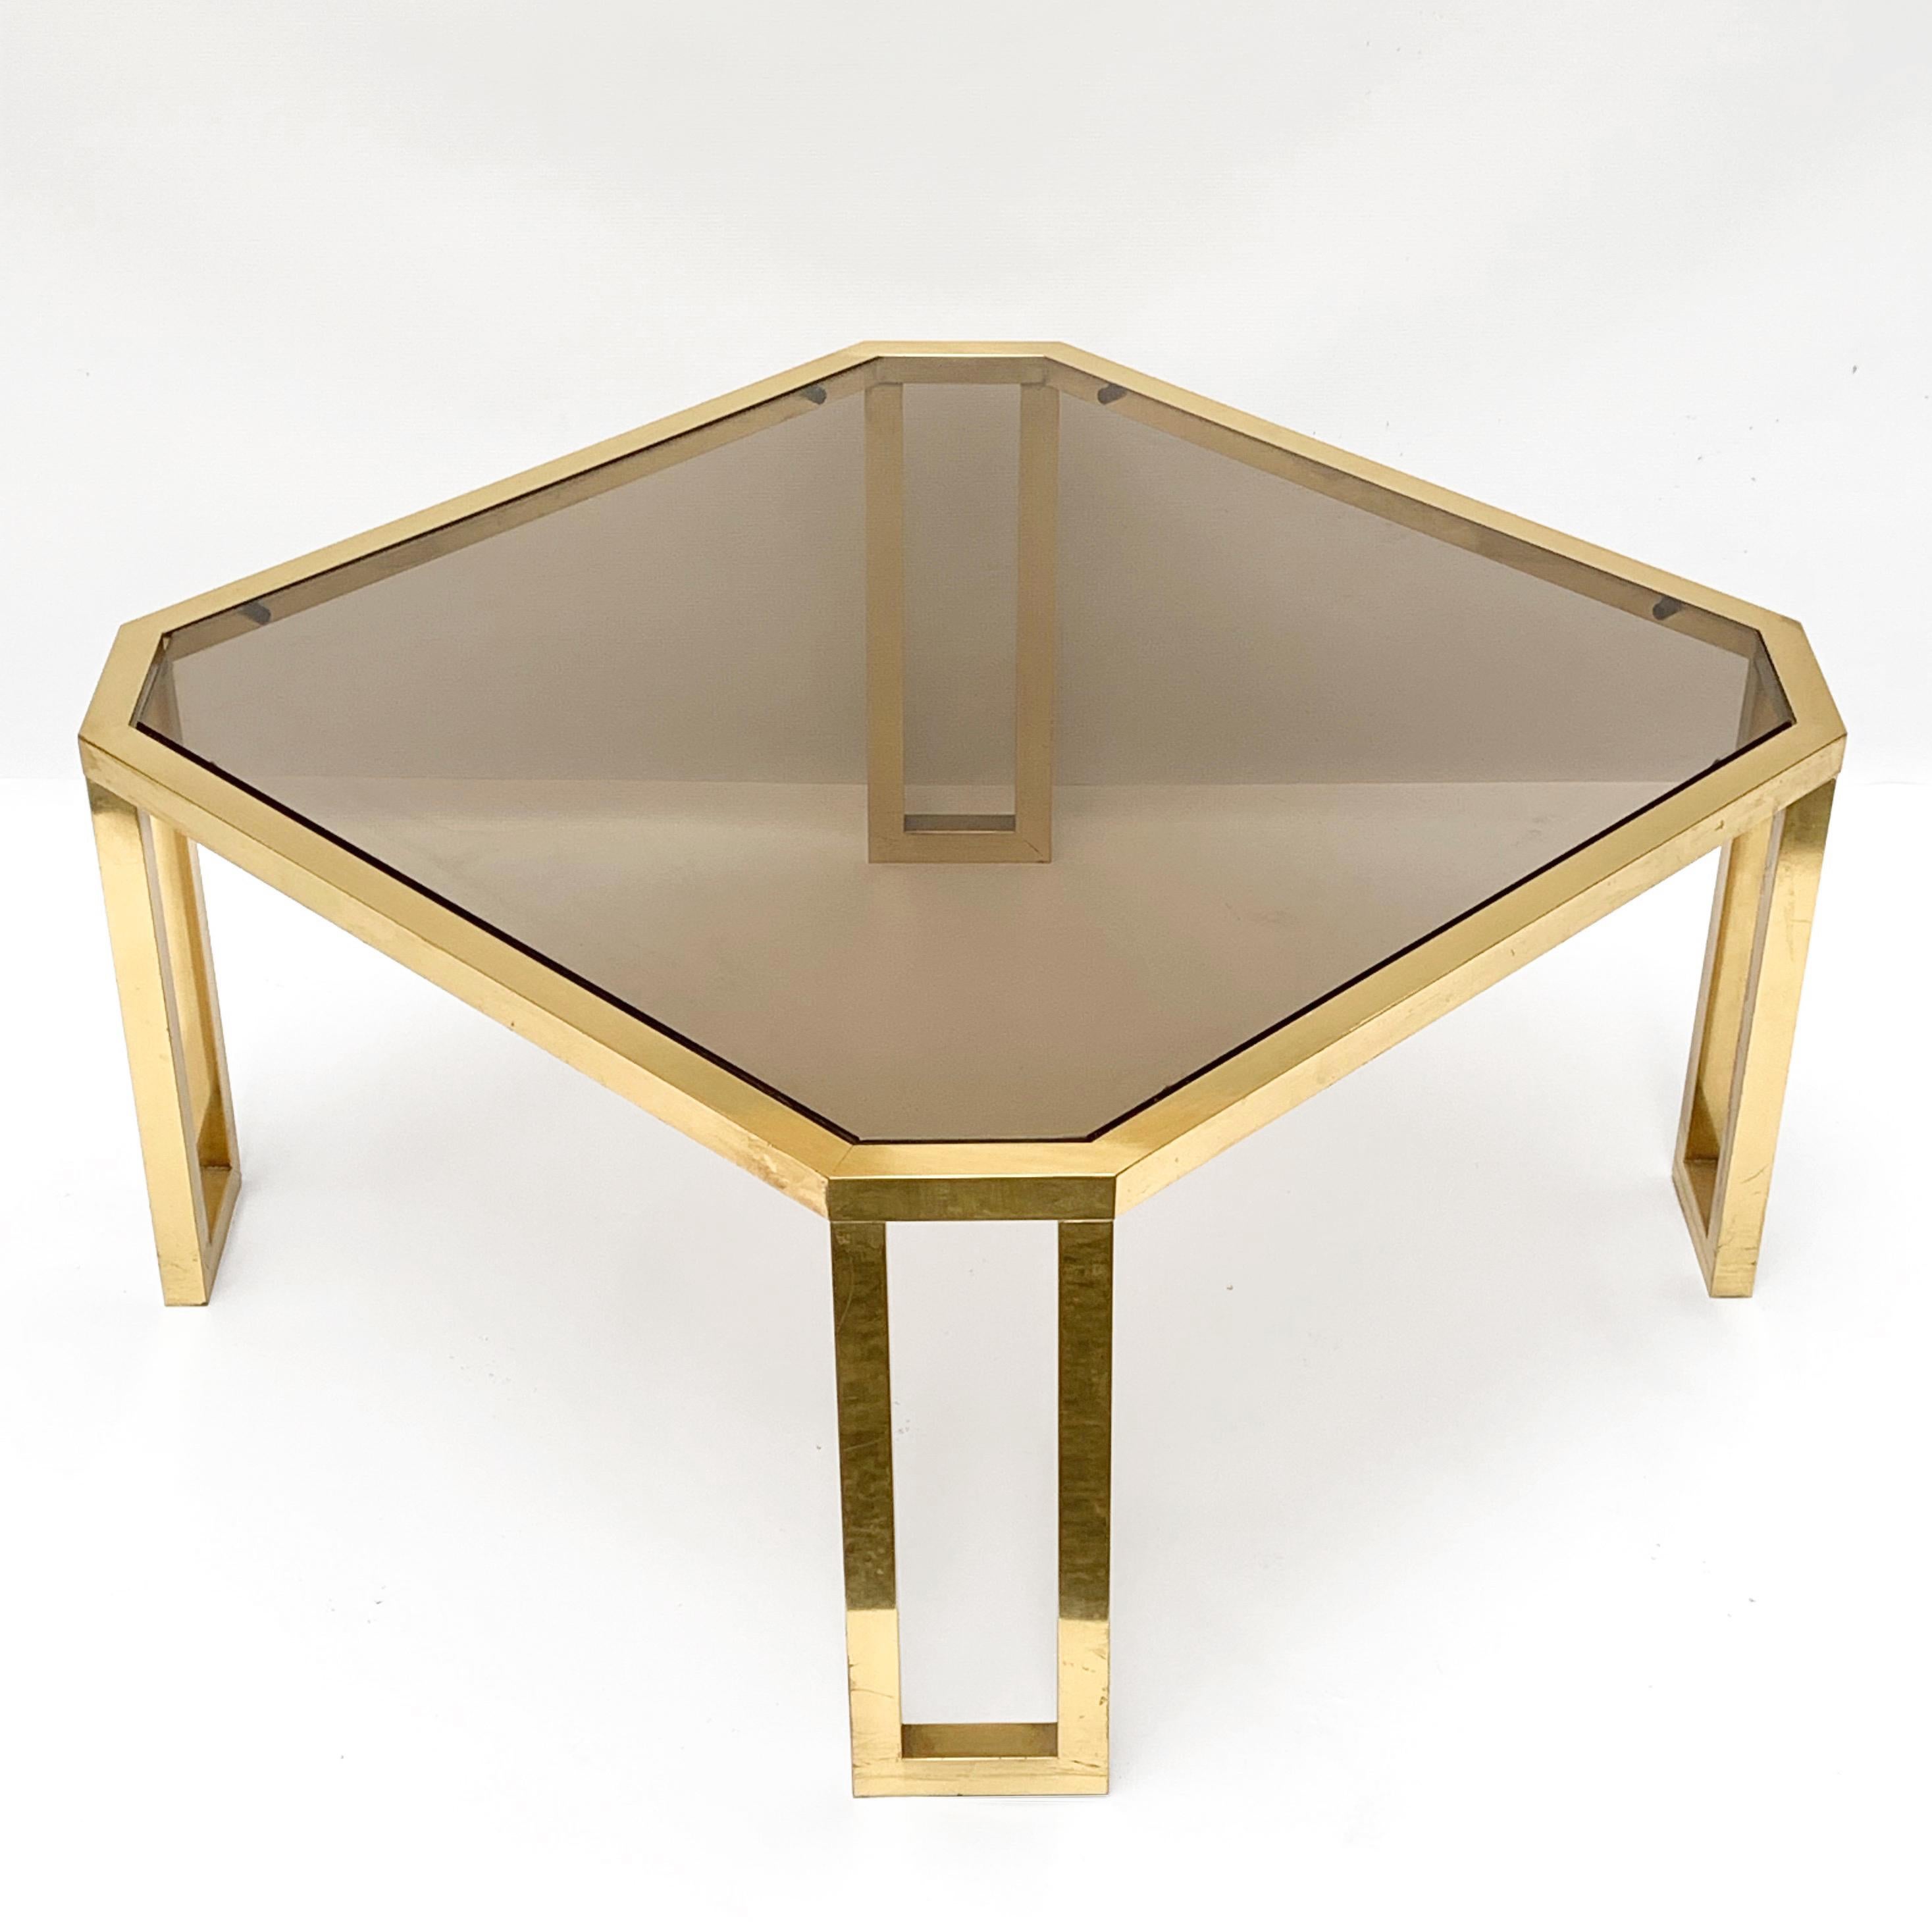 20th Century Maison Jansen Octagonal Tables in Brass and Glass, France, 1970s Coffee Tables For Sale